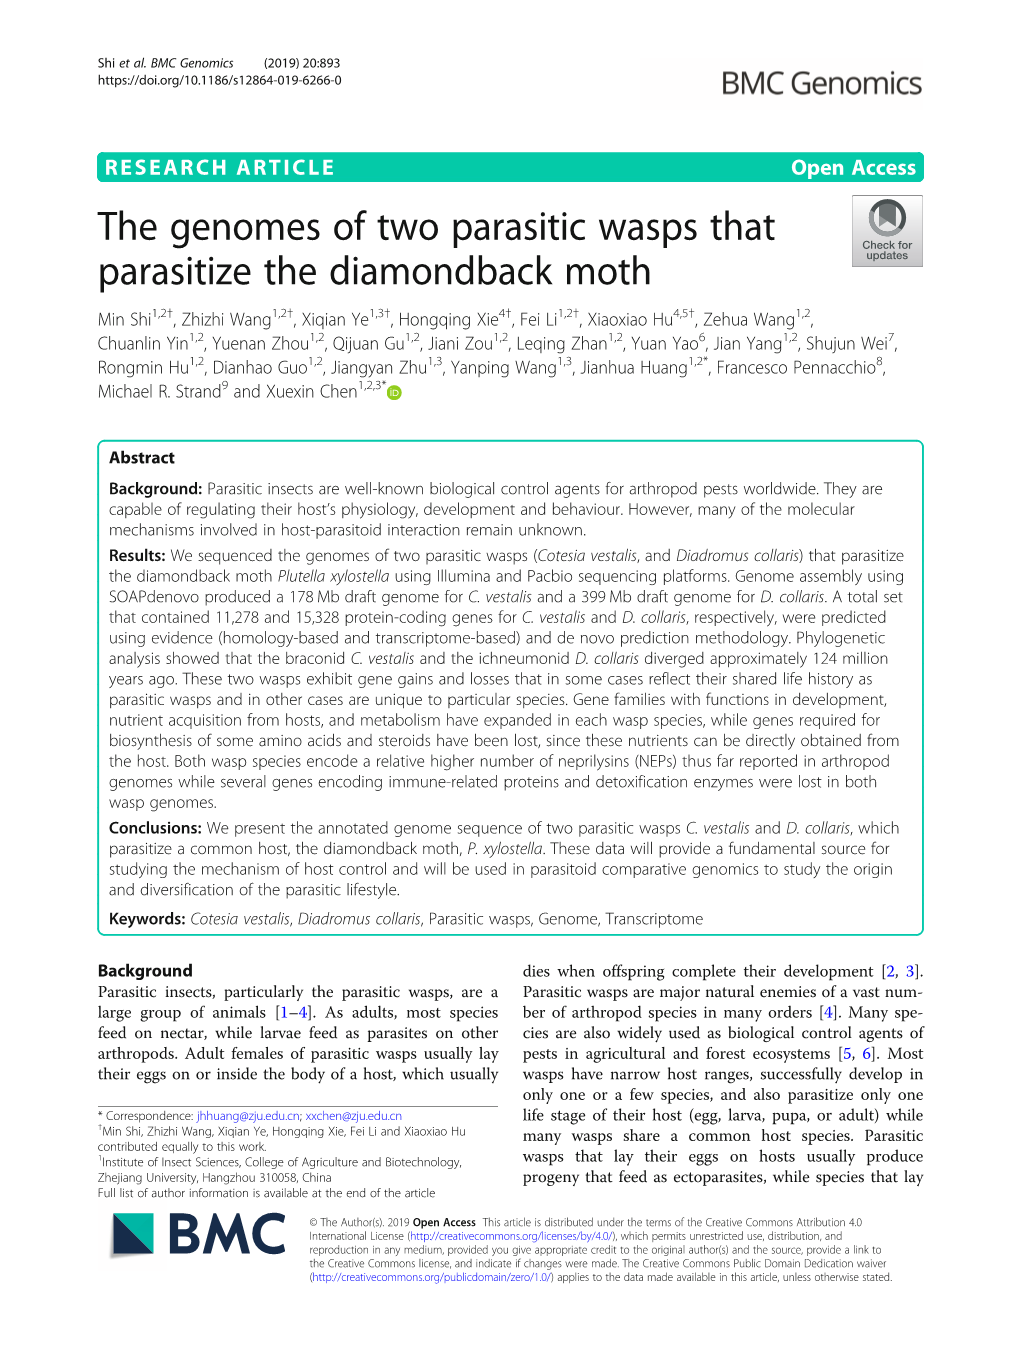 The Genomes of Two Parasitic Wasps That Parasitize the Diamondback Moth